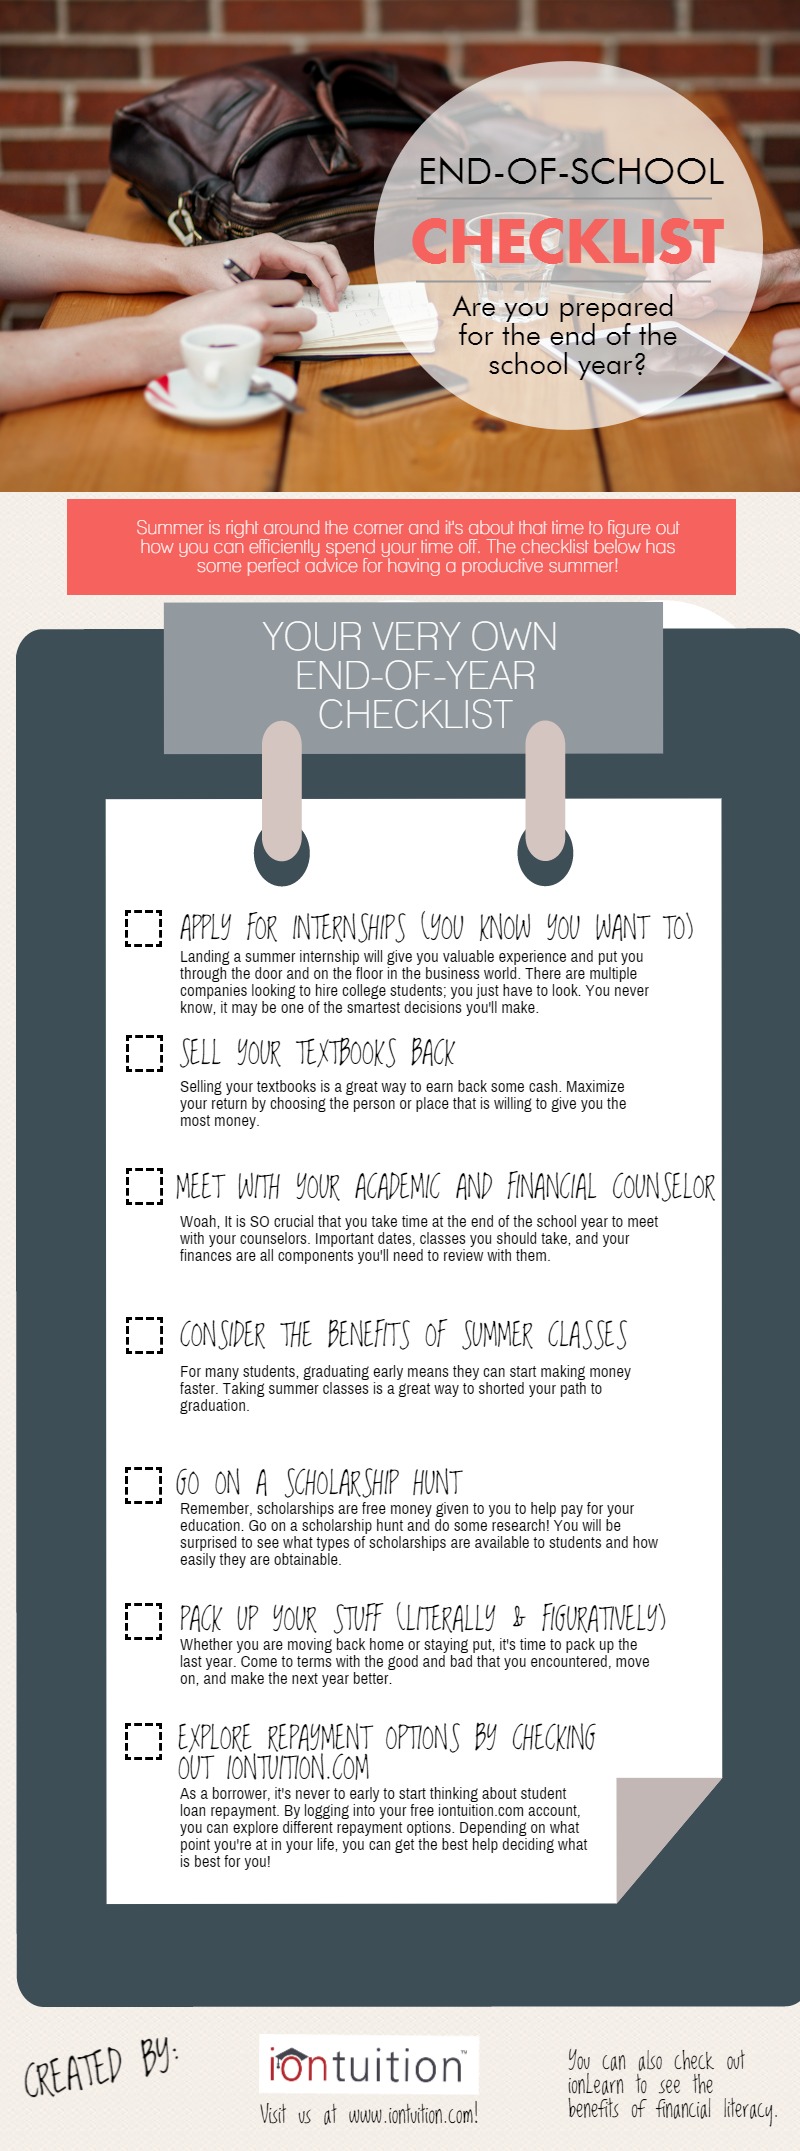 iontuition's End of School Checklist